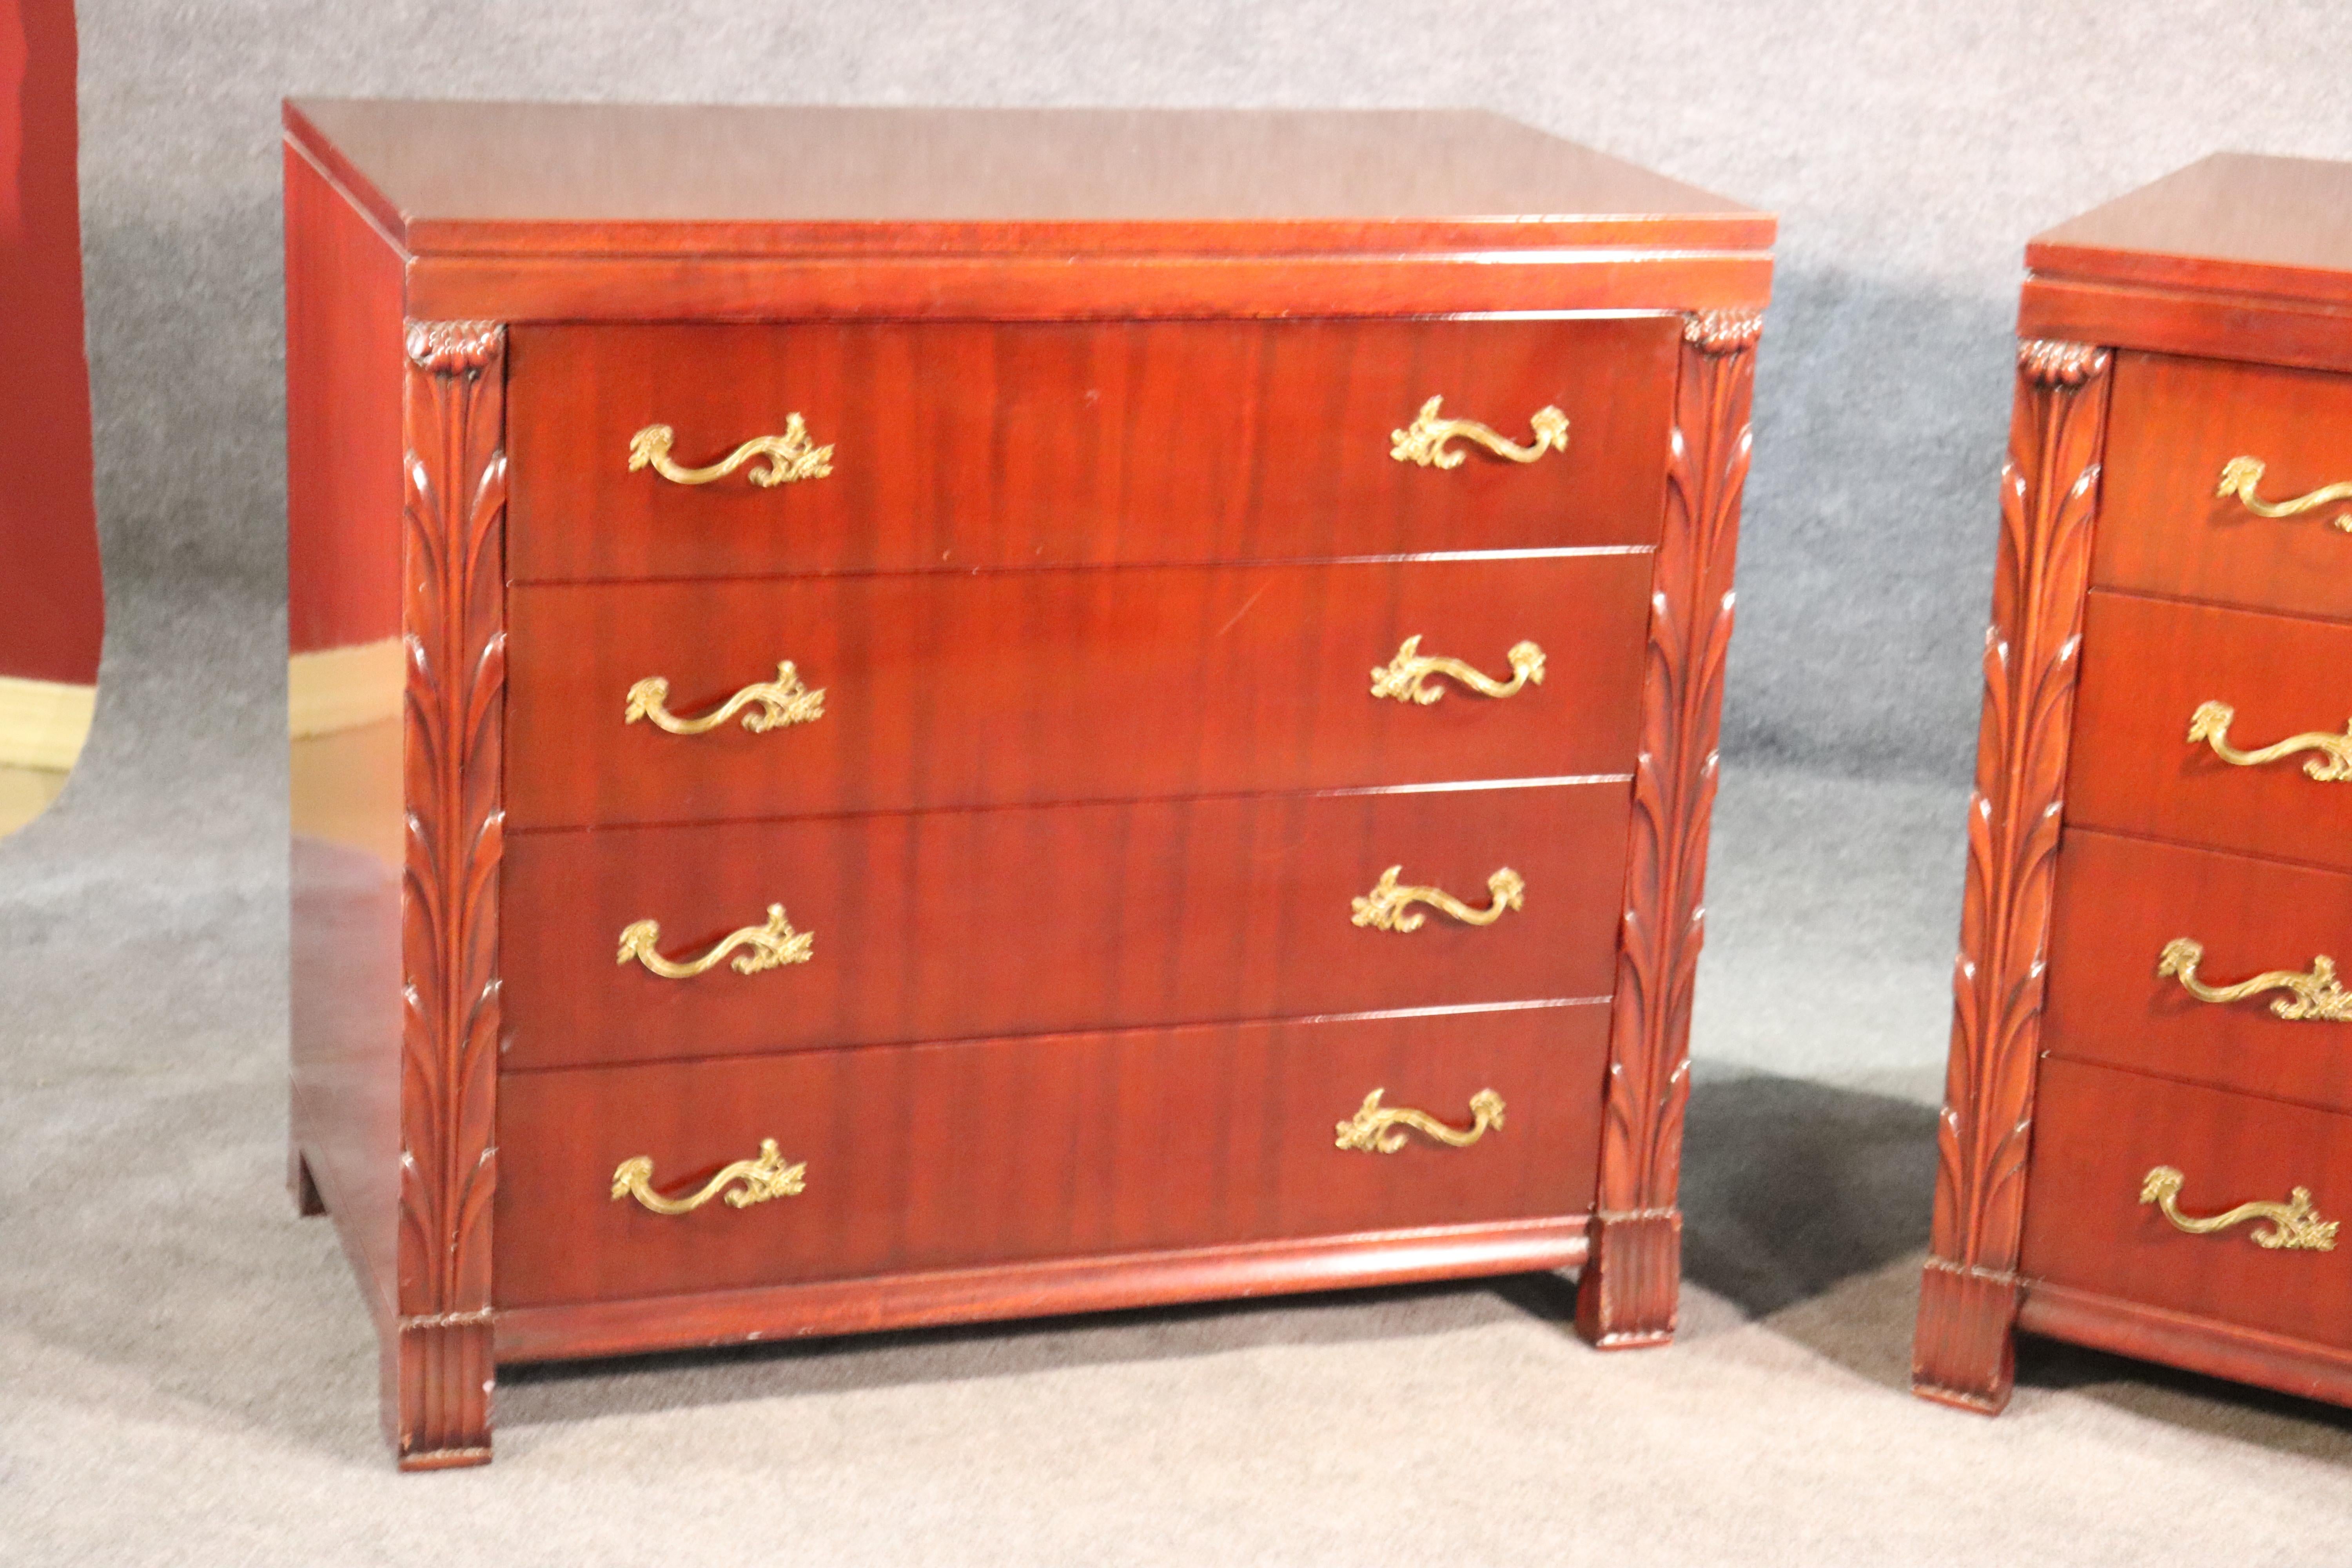 This is a nice paid of John Stuart Hollywood Regency dressers. They are in a red mahogany and not a traditional brown mahogany. They have dovetailed drawers and are in good condition. 
They measure 34.5 tall x 38 wide x 20.75 deep.